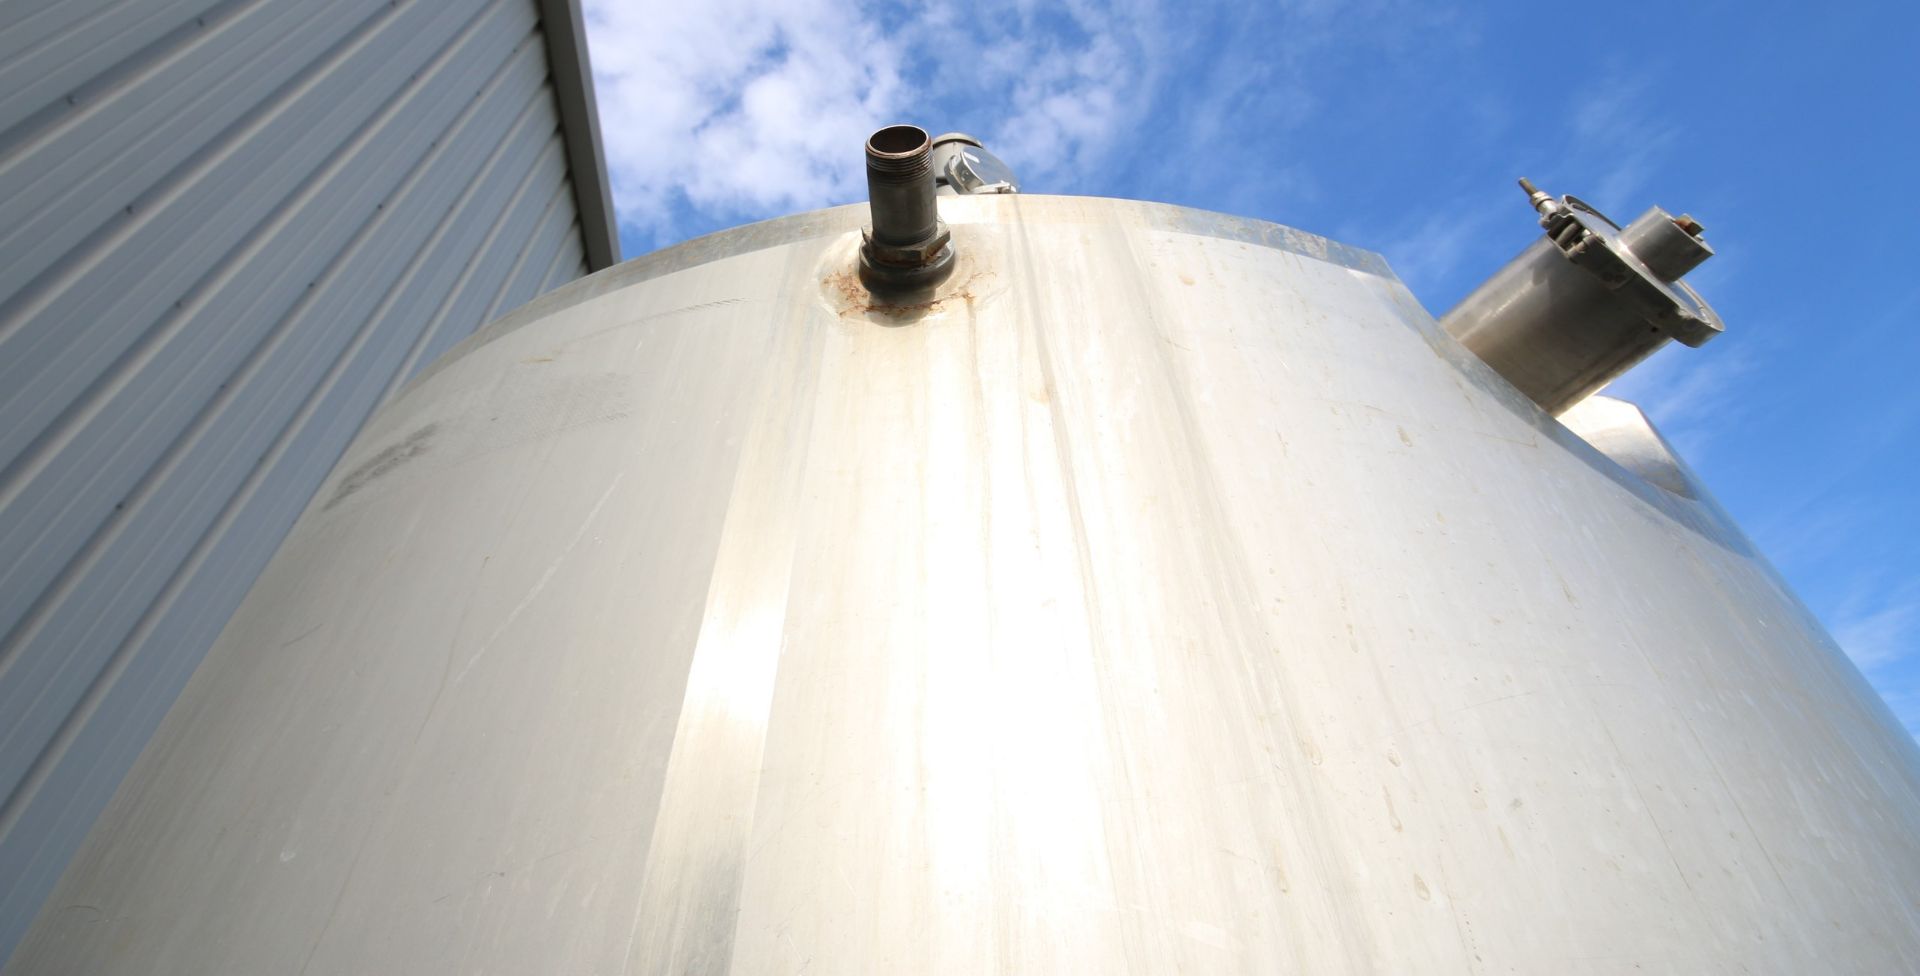 Precision Stainless Inc. 600 Gallon Dome Top Jacketed S/S Tank, S/N 6091-14, Lightnin Vertical - Image 7 of 10